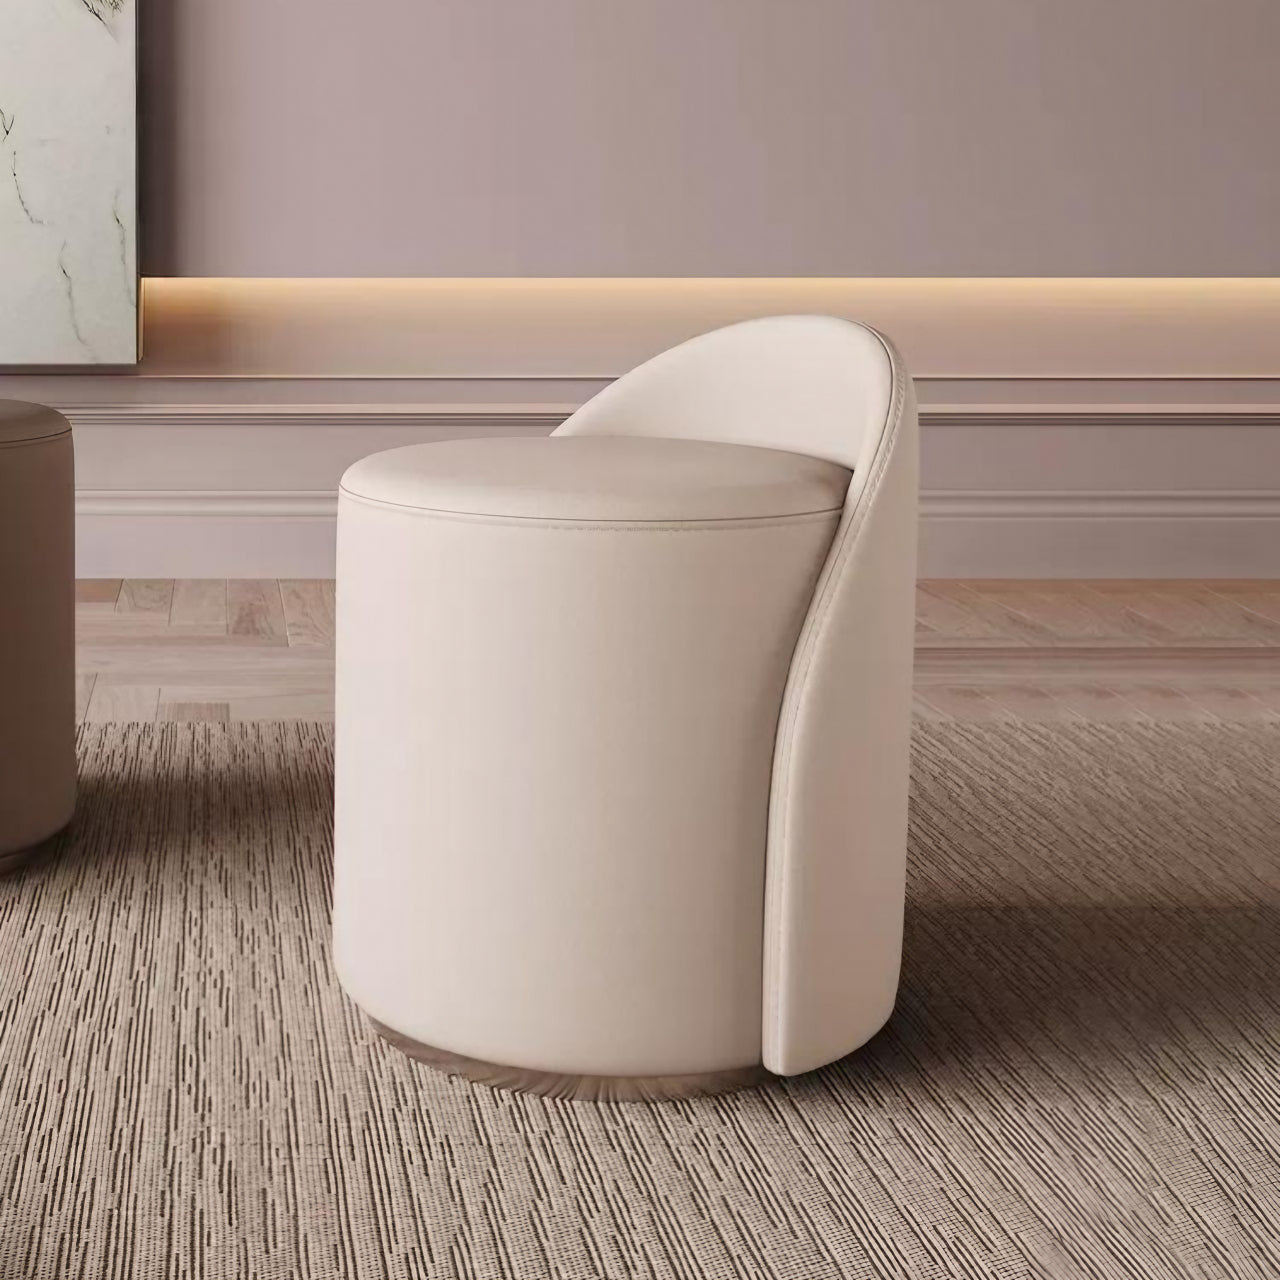 Off White Leather Swivel Makeup Stool in a Luxurious Setting